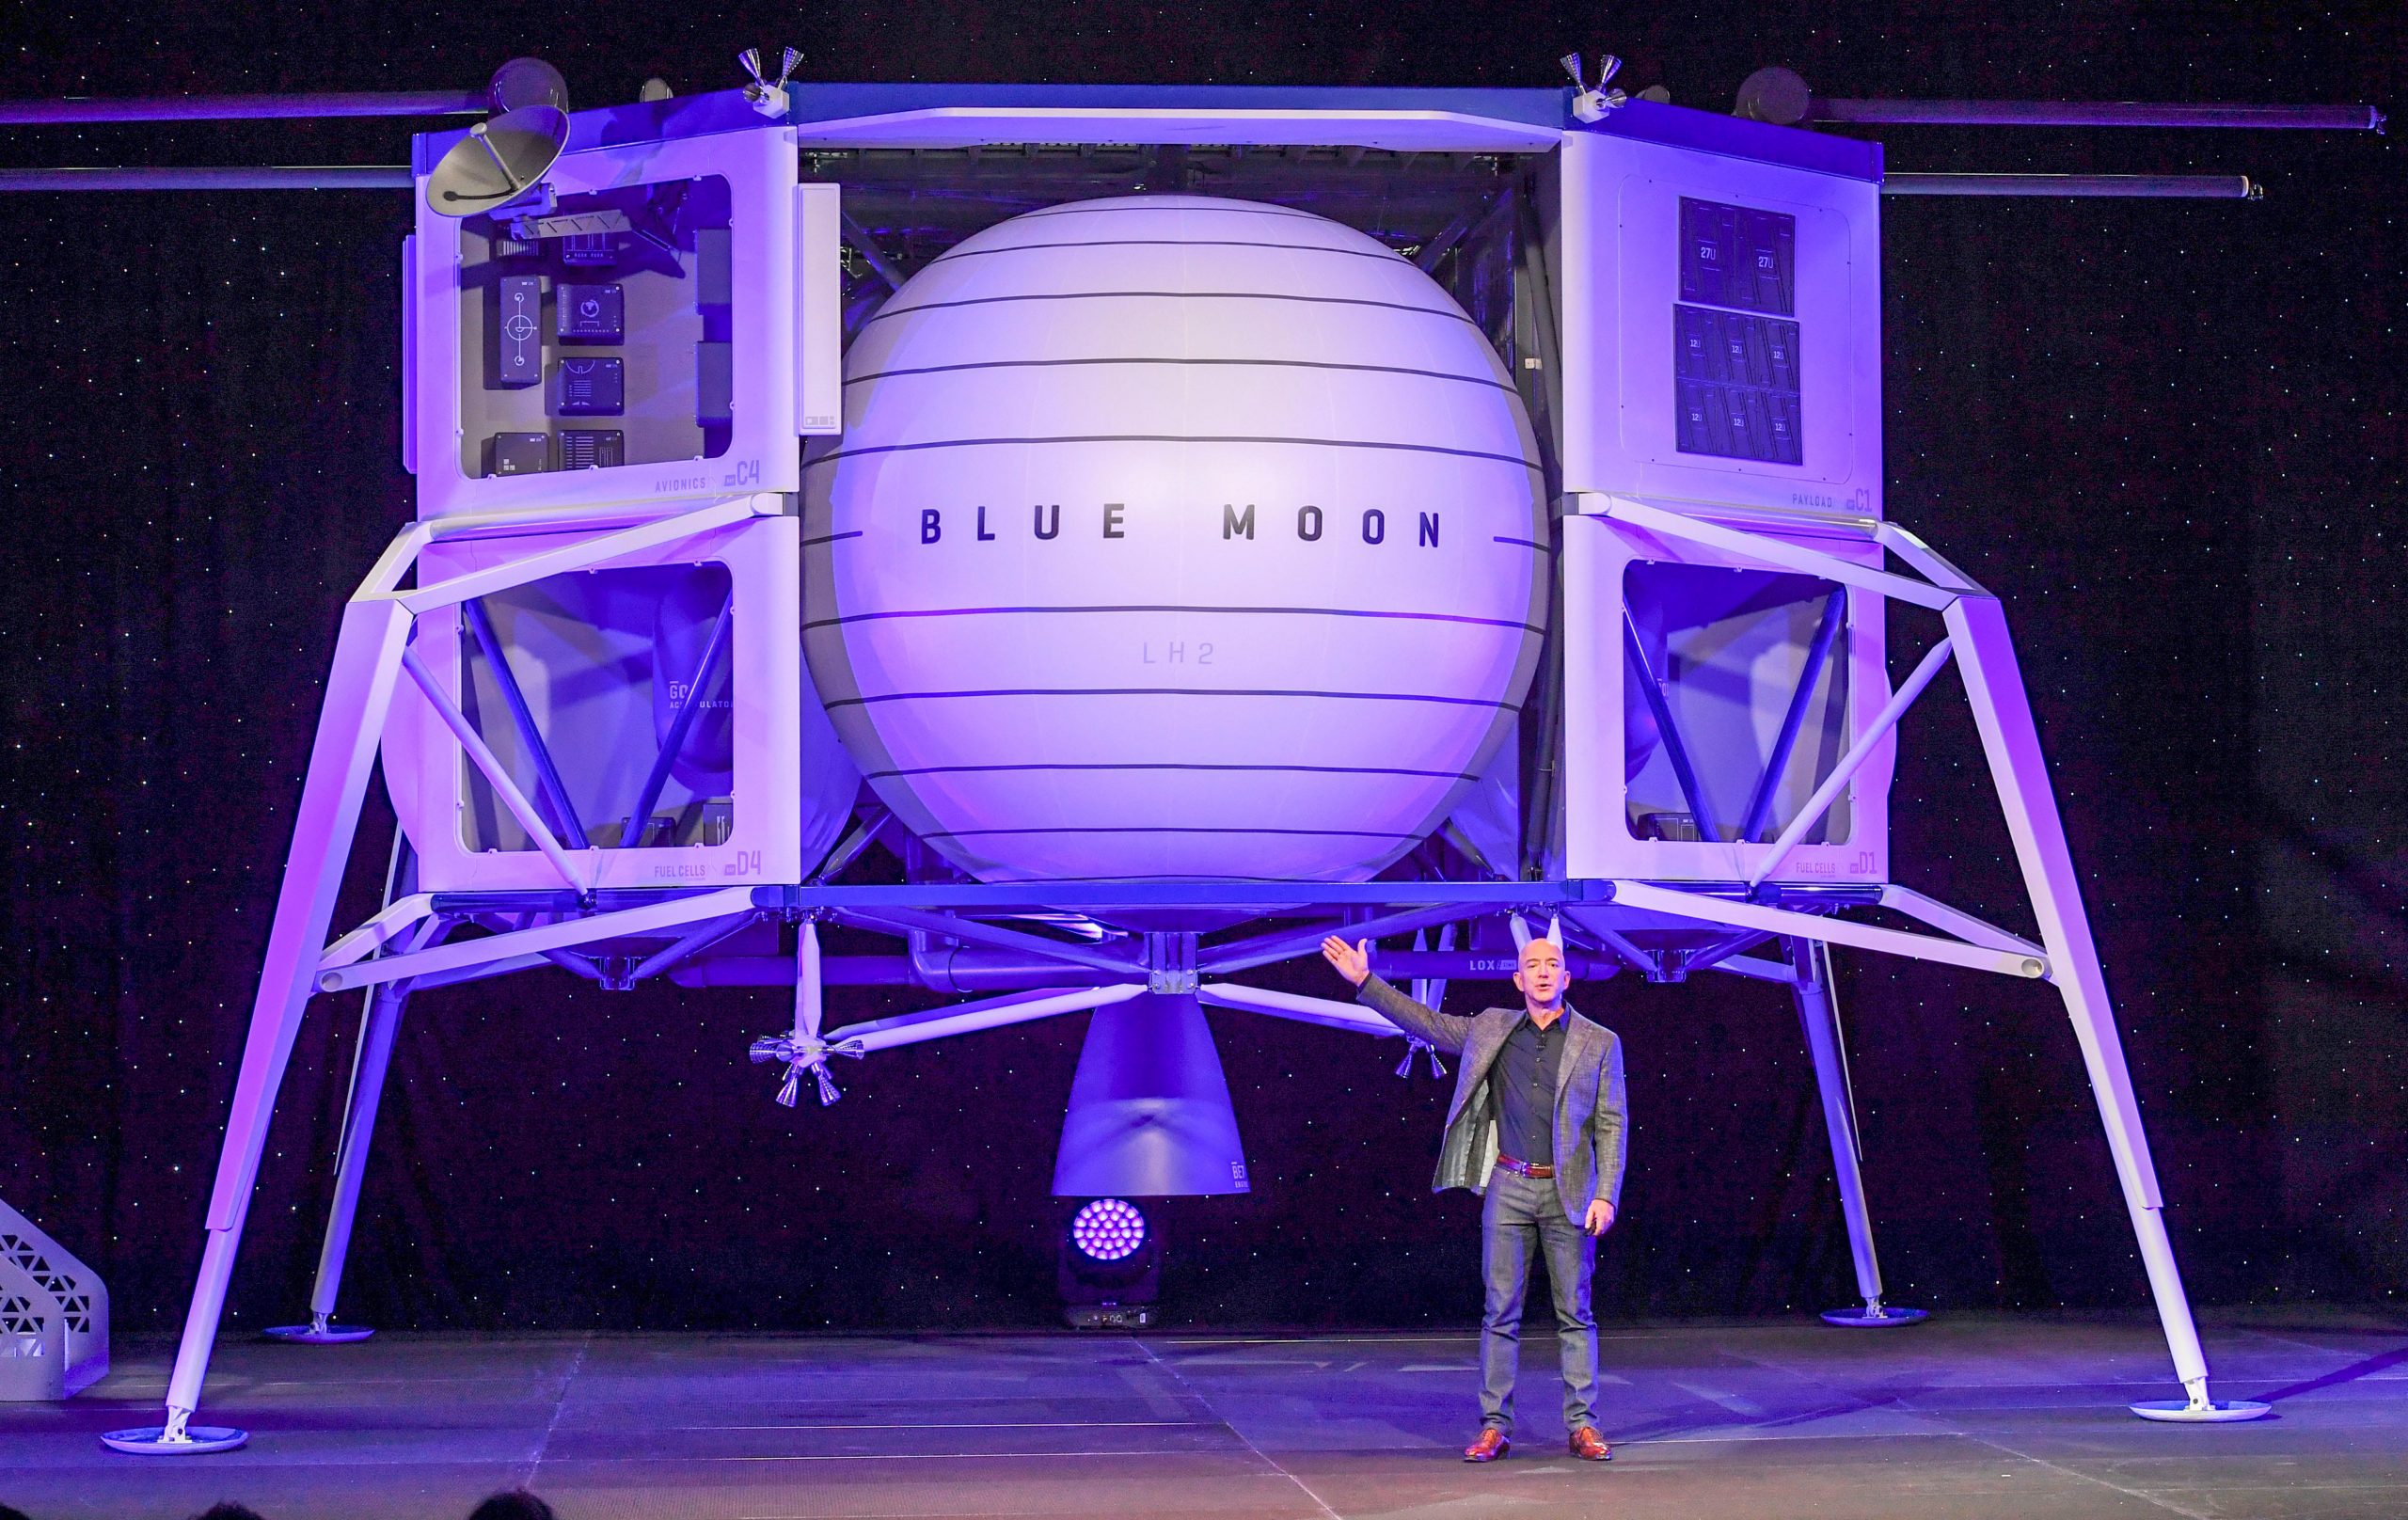 Jeff Bezos gesturing towards a space lander, which looks like an orb with four legs.